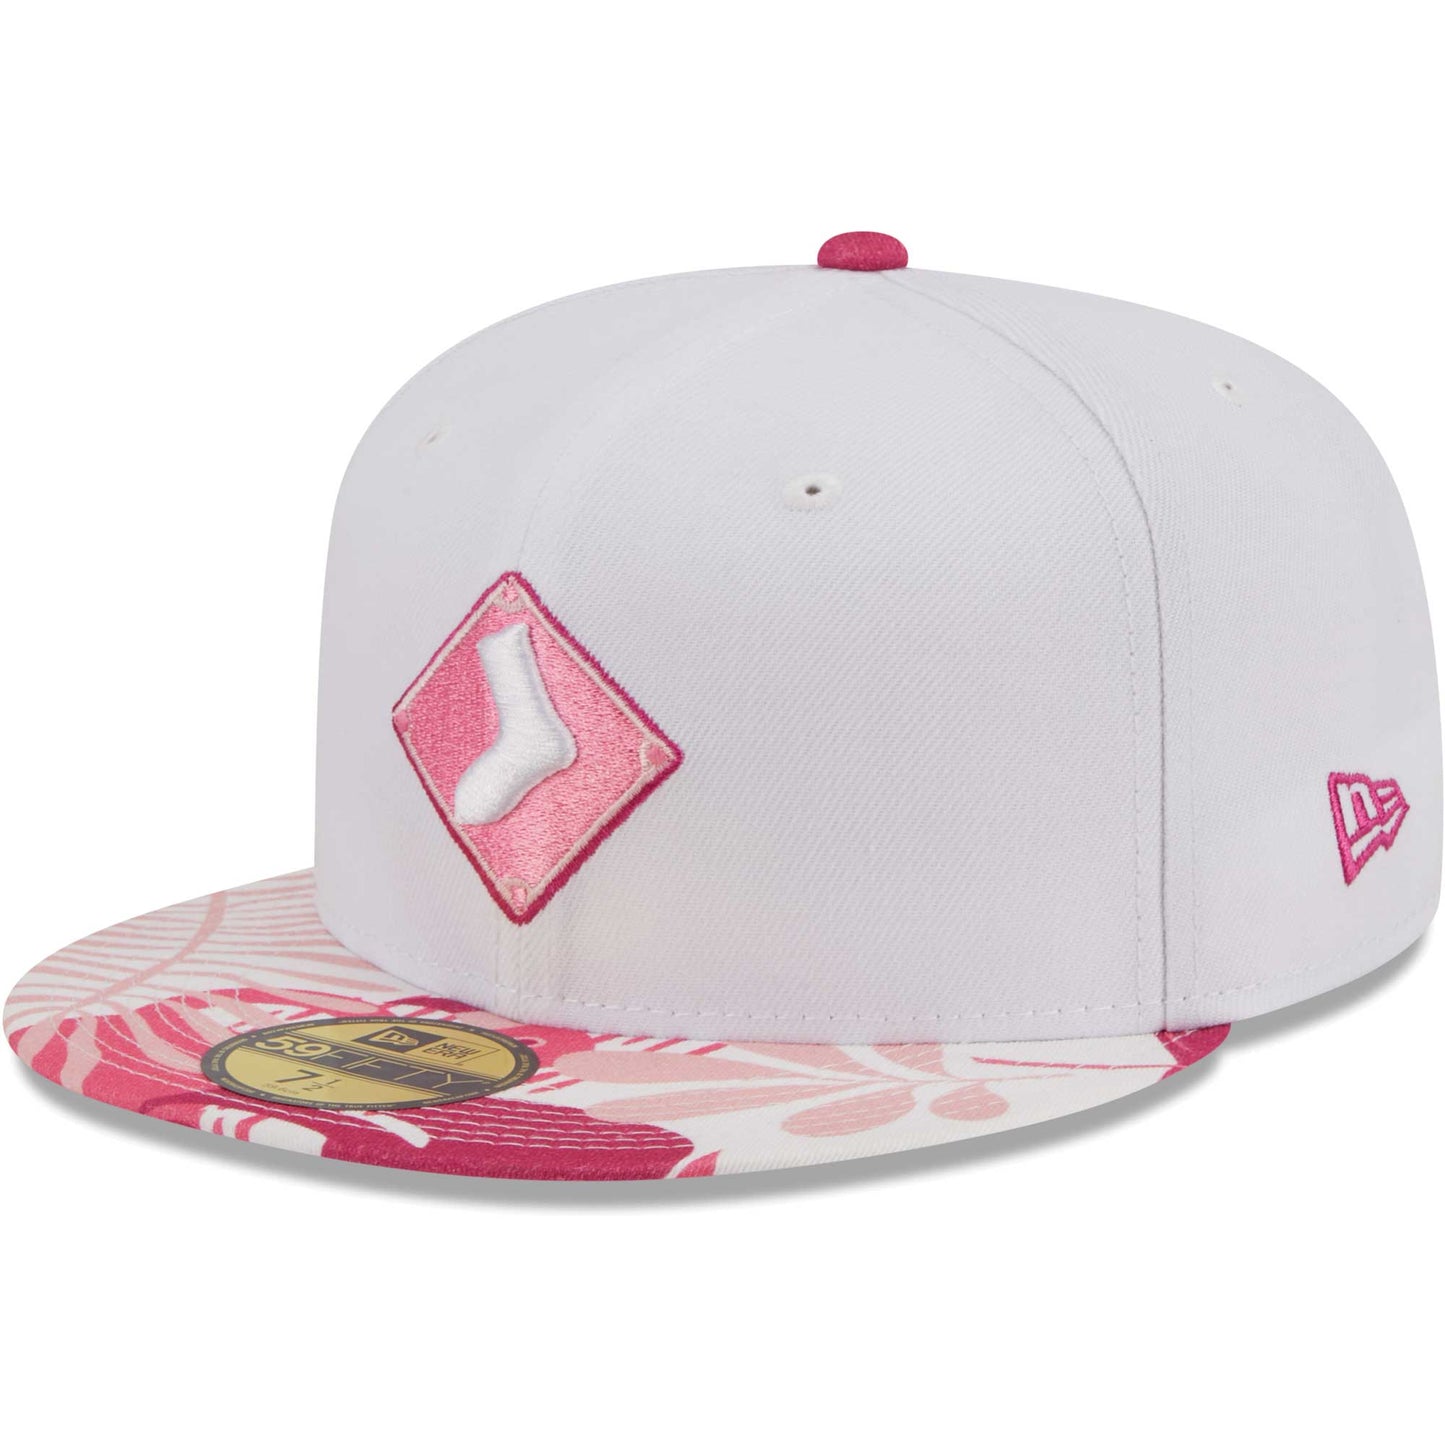 Chicago White Sox New Era Flamingo 59FIFTY Fitted Hat - White/Pink